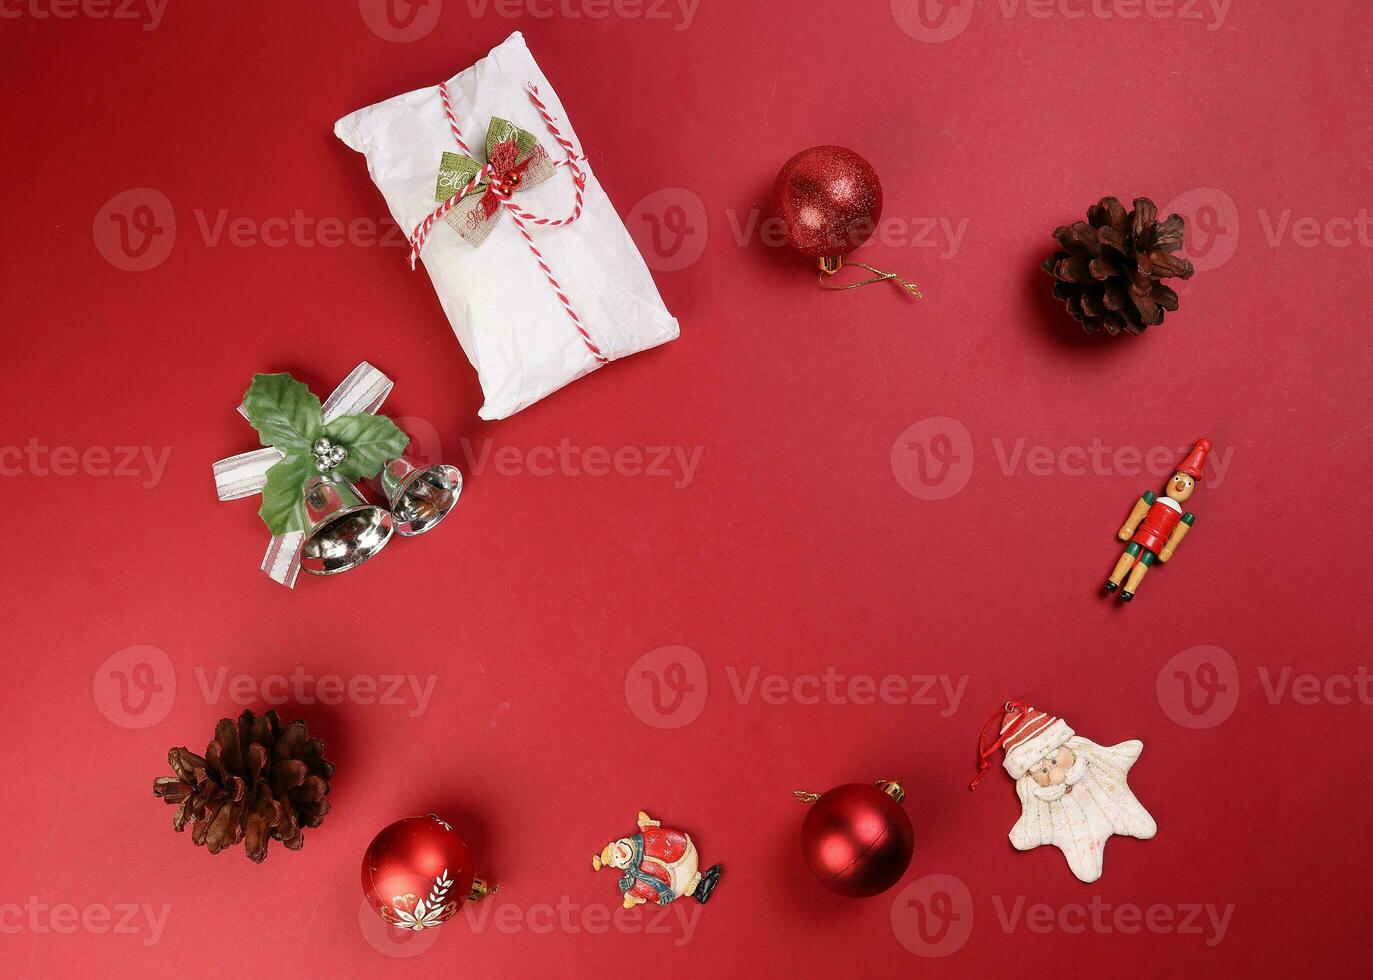 Christmas xmas decoration ornament bell gift wrap stollen fruit cake food pine fruit on red background photo